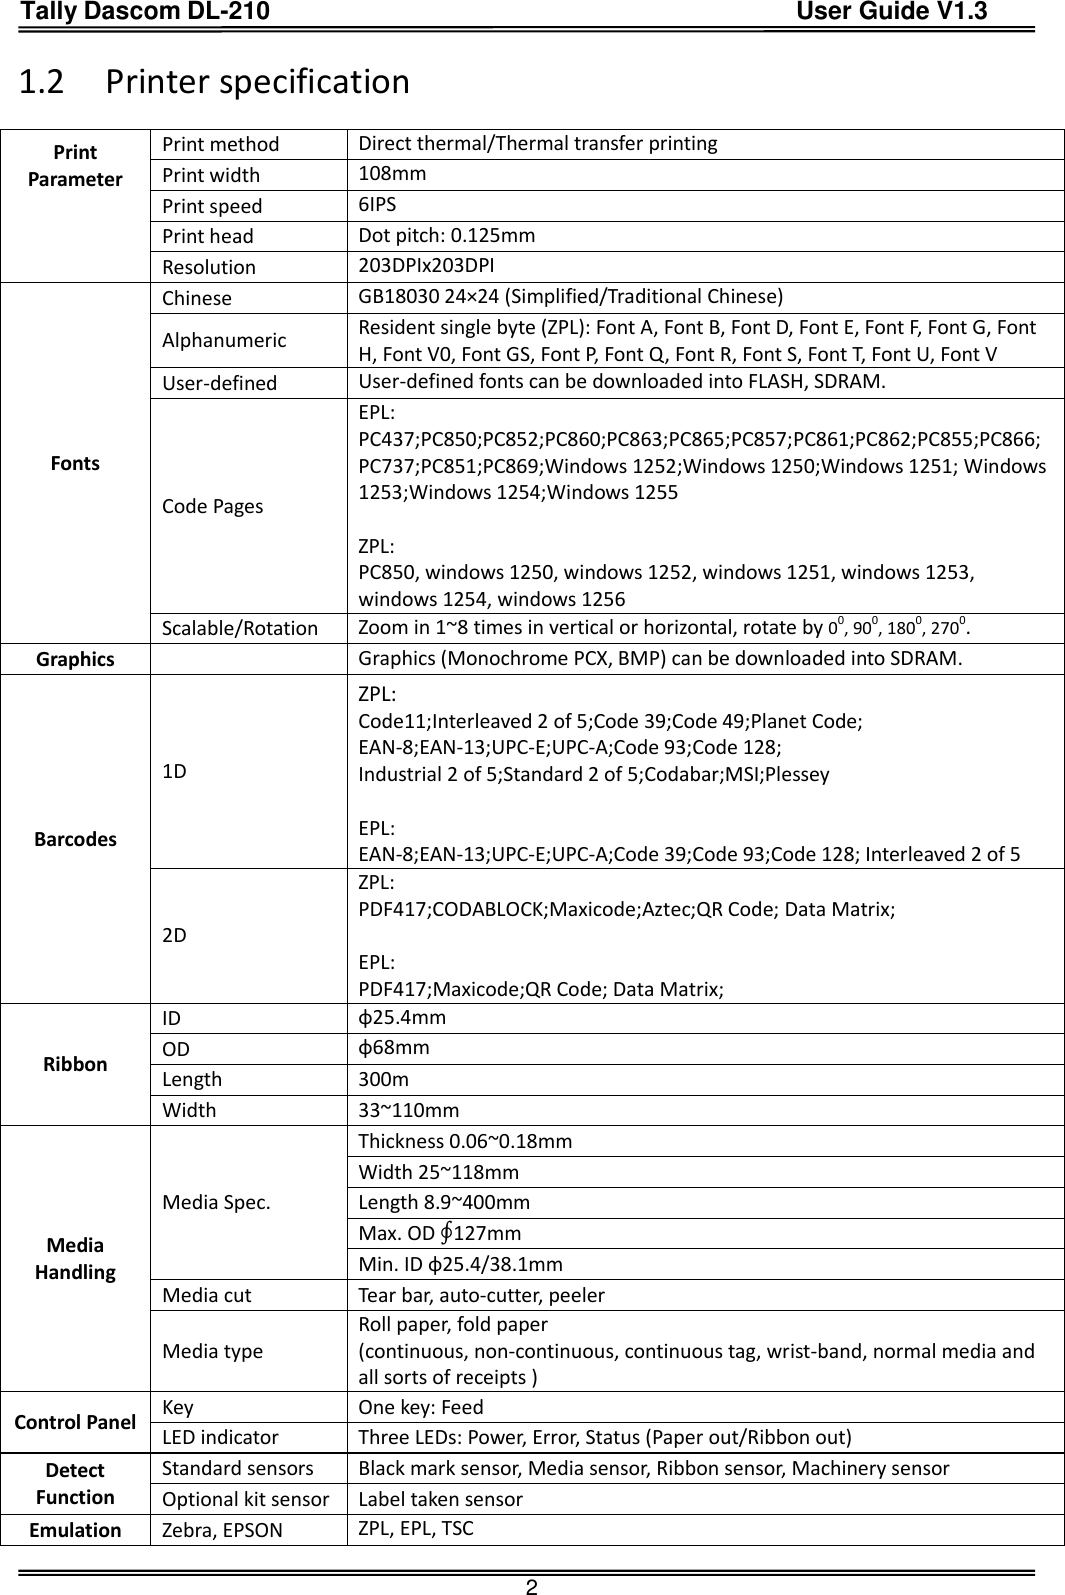 Tally Dascom DL-210                                          User Guide V1.3  2 1.2 Printer specification  Print Parameter    Print method Direct thermal/Thermal transfer printing Print width 108mm Print speed 6IPS Print head Dot pitch: 0.125mm Resolution 203DPIx203DPI Fonts Chinese GB18030 24×24 (Simplified/Traditional Chinese) Alphanumeric Resident single byte (ZPL): Font A, Font B, Font D, Font E, Font F, Font G, Font H, Font V0, Font GS, Font P, Font Q, Font R, Font S, Font T, Font U, Font V User-defined User-defined fonts can be downloaded into FLASH, SDRAM. Code Pages EPL: PC437;PC850;PC852;PC860;PC863;PC865;PC857;PC861;PC862;PC855;PC866; PC737;PC851;PC869;Windows 1252;Windows 1250;Windows 1251; Windows 1253;Windows 1254;Windows 1255  ZPL: PC850, windows 1250, windows 1252, windows 1251, windows 1253, windows 1254, windows 1256 Scalable/Rotation Zoom in 1~8 times in vertical or horizontal, rotate by 00, 900, 1800, 2700. Graphics  Graphics (Monochrome PCX, BMP) can be downloaded into SDRAM. Barcodes 1D ZPL: Code11;Interleaved 2 of 5;Code 39;Code 49;Planet Code; EAN-8;EAN-13;UPC-E;UPC-A;Code 93;Code 128;   Industrial 2 of 5;Standard 2 of 5;Codabar;MSI;Plessey  EPL: EAN-8;EAN-13;UPC-E;UPC-A;Code 39;Code 93;Code 128; Interleaved 2 of 5 2D ZPL: PDF417;CODABLOCK;Maxicode;Aztec;QR Code; Data Matrix;  EPL: PDF417;Maxicode;QR Code; Data Matrix; Ribbon ID φ25.4mm OD φ68mm Length 300m Width 33~110mm Media Handling Media Spec. Thickness 0.06~0.18mm Width 25~118mm Length 8.9~400mm Max. OD ∮127mm Min. ID φ25.4/38.1mm Media cut Tear bar, auto-cutter, peeler Media type Roll paper, fold paper (continuous, non-continuous, continuous tag, wrist-band, normal media and all sorts of receipts ) Control Panel Key One key: Feed LED indicator Three LEDs: Power, Error, Status (Paper out/Ribbon out) Detect Function Standard sensors Black mark sensor, Media sensor, Ribbon sensor, Machinery sensor Optional kit sensor Label taken sensor Emulation Zebra, EPSON ZPL, EPL, TSC 